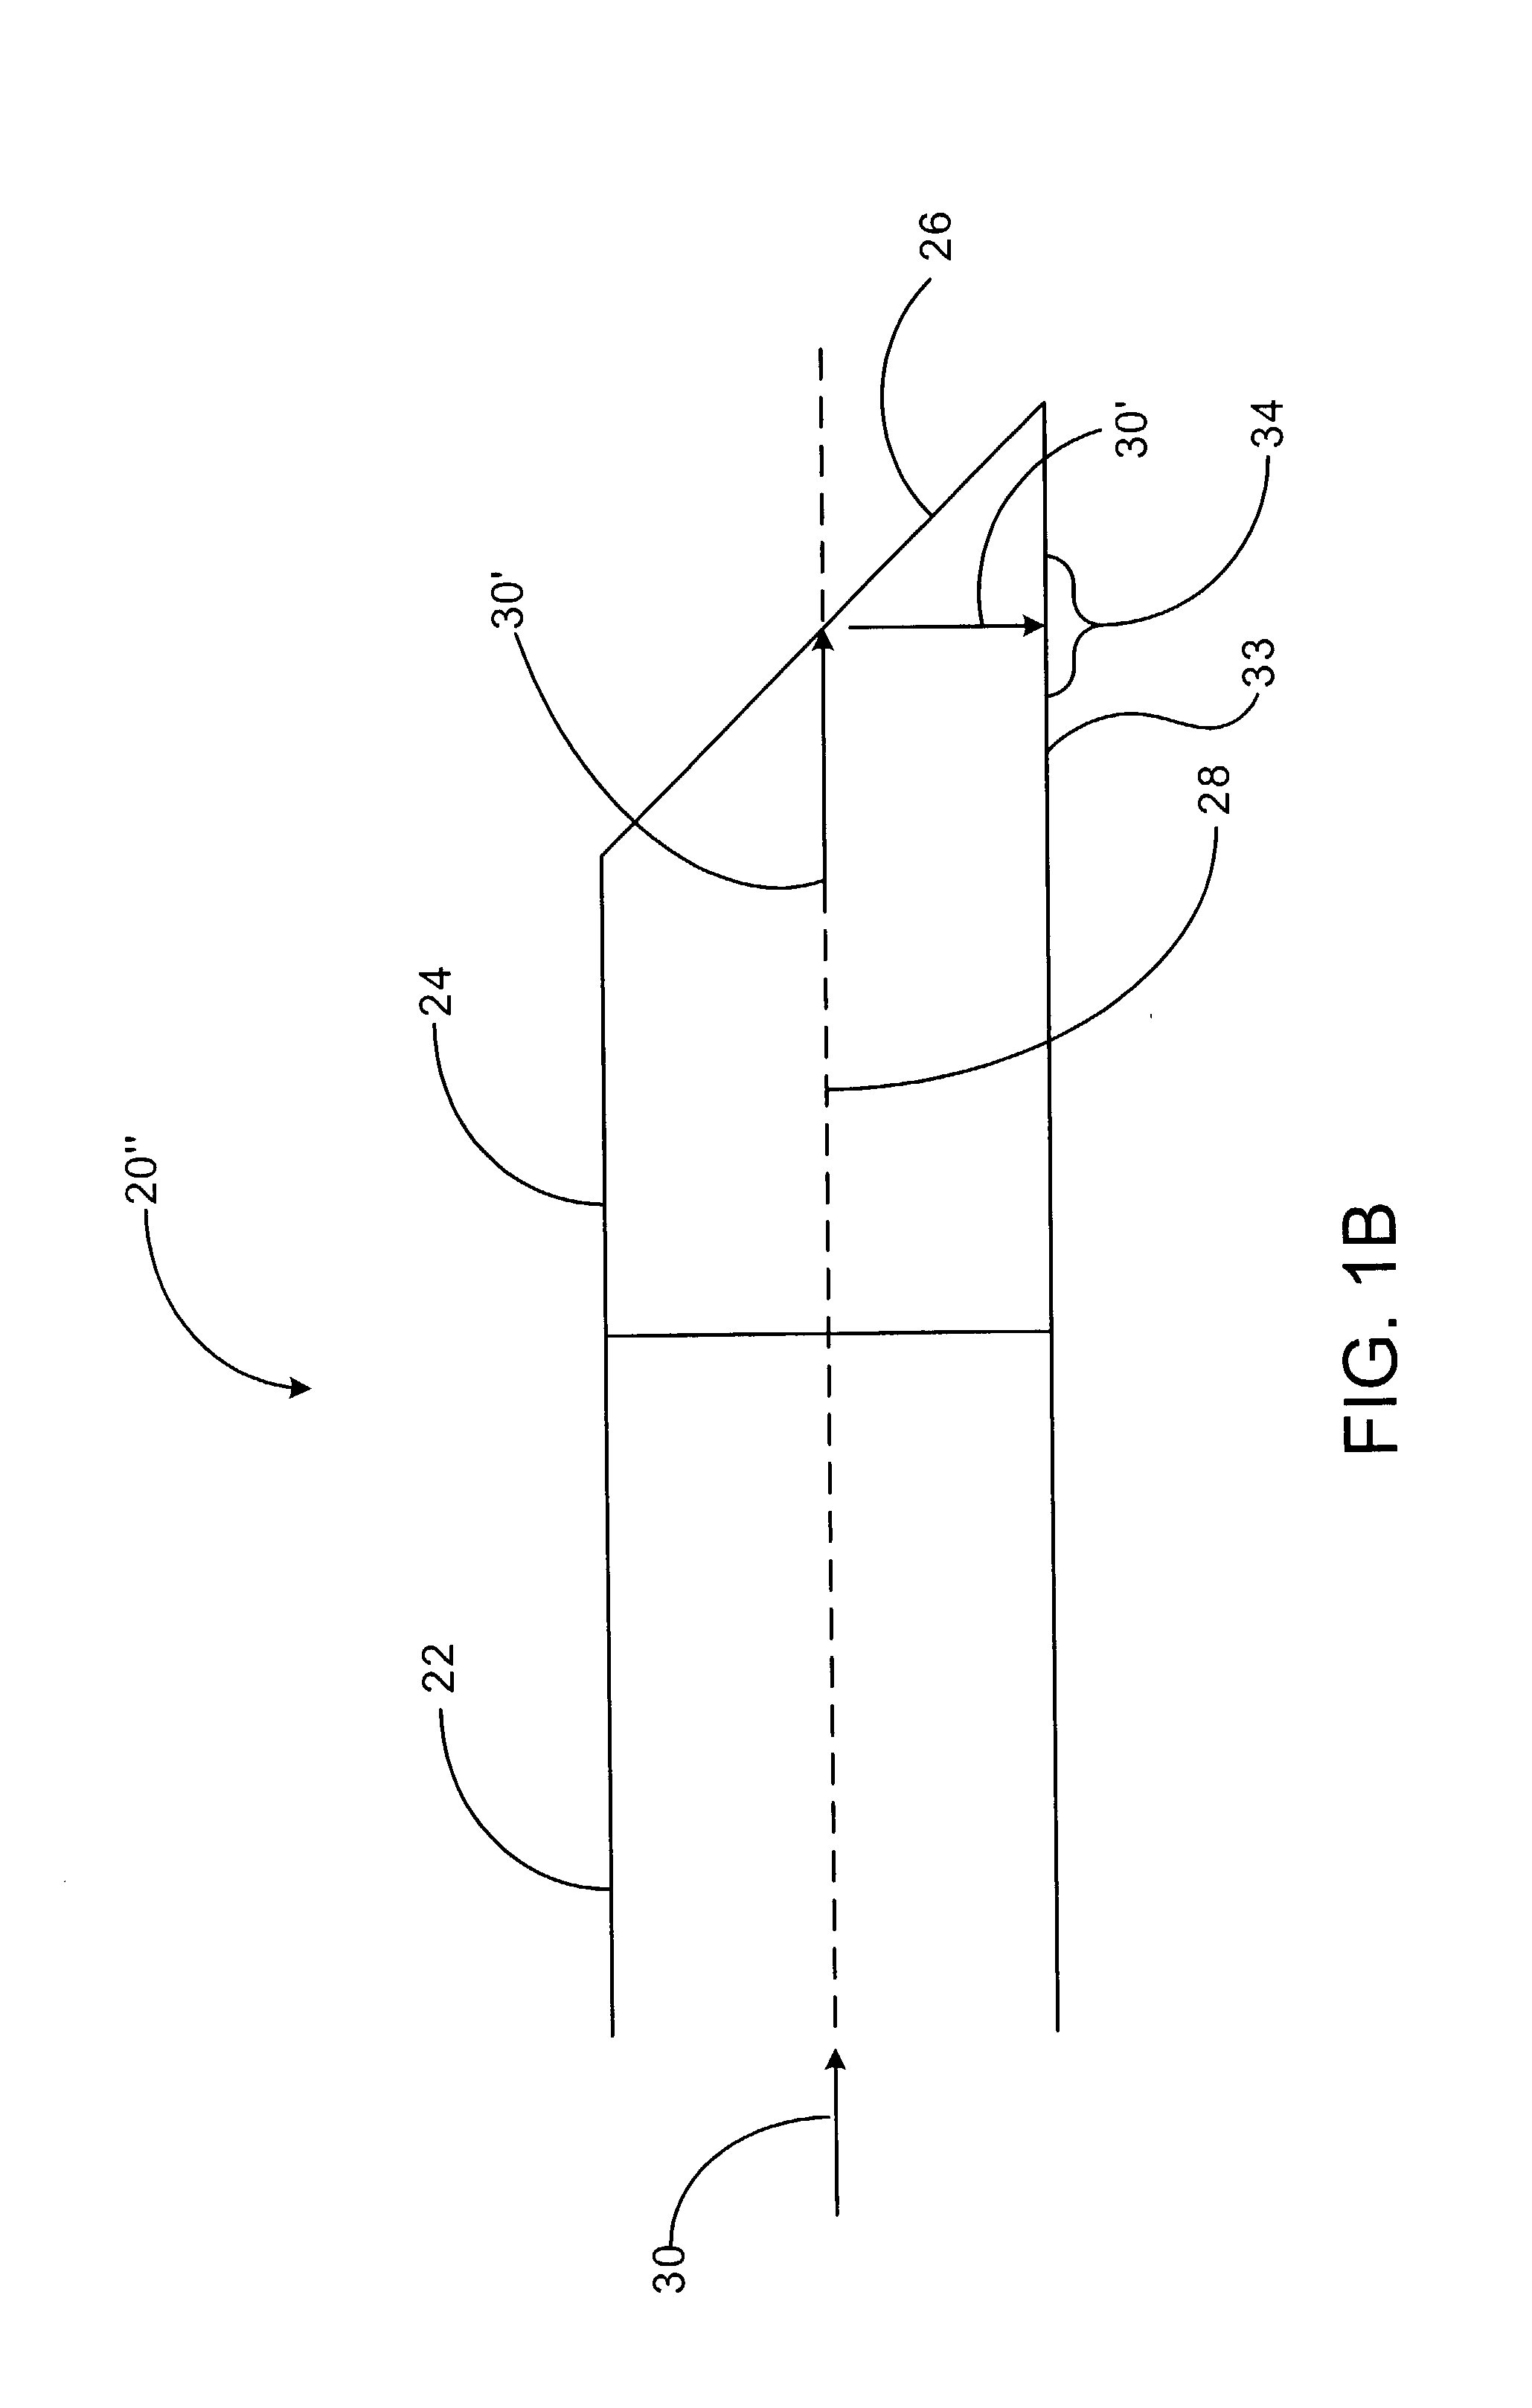 Beam bending apparatus and method of manufacture